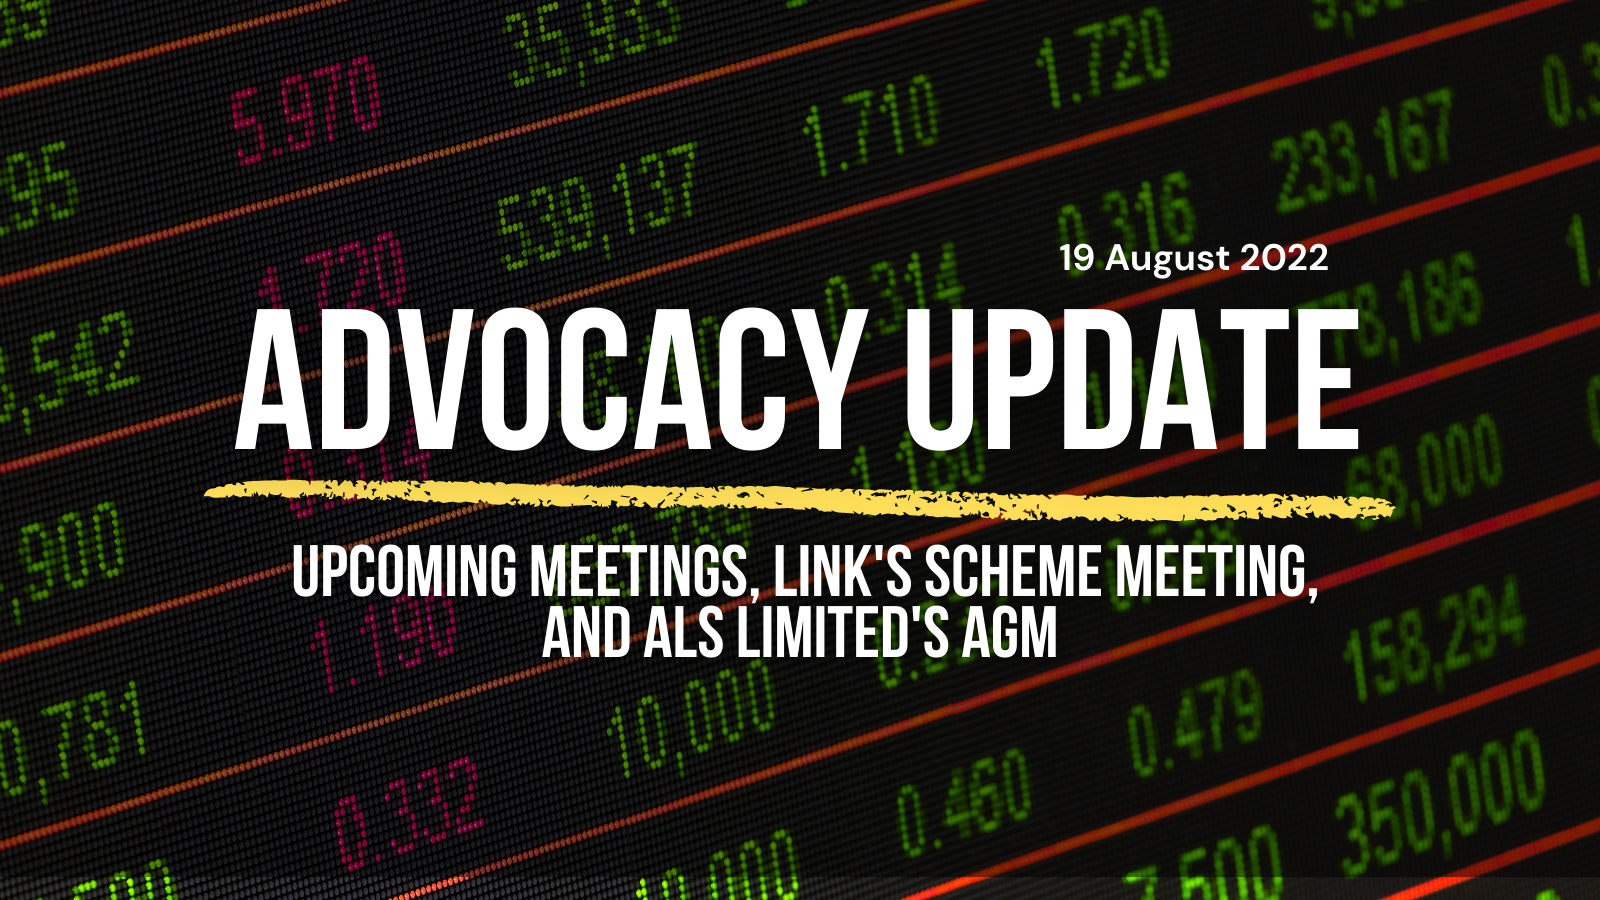 62. advocacy update - 19 August